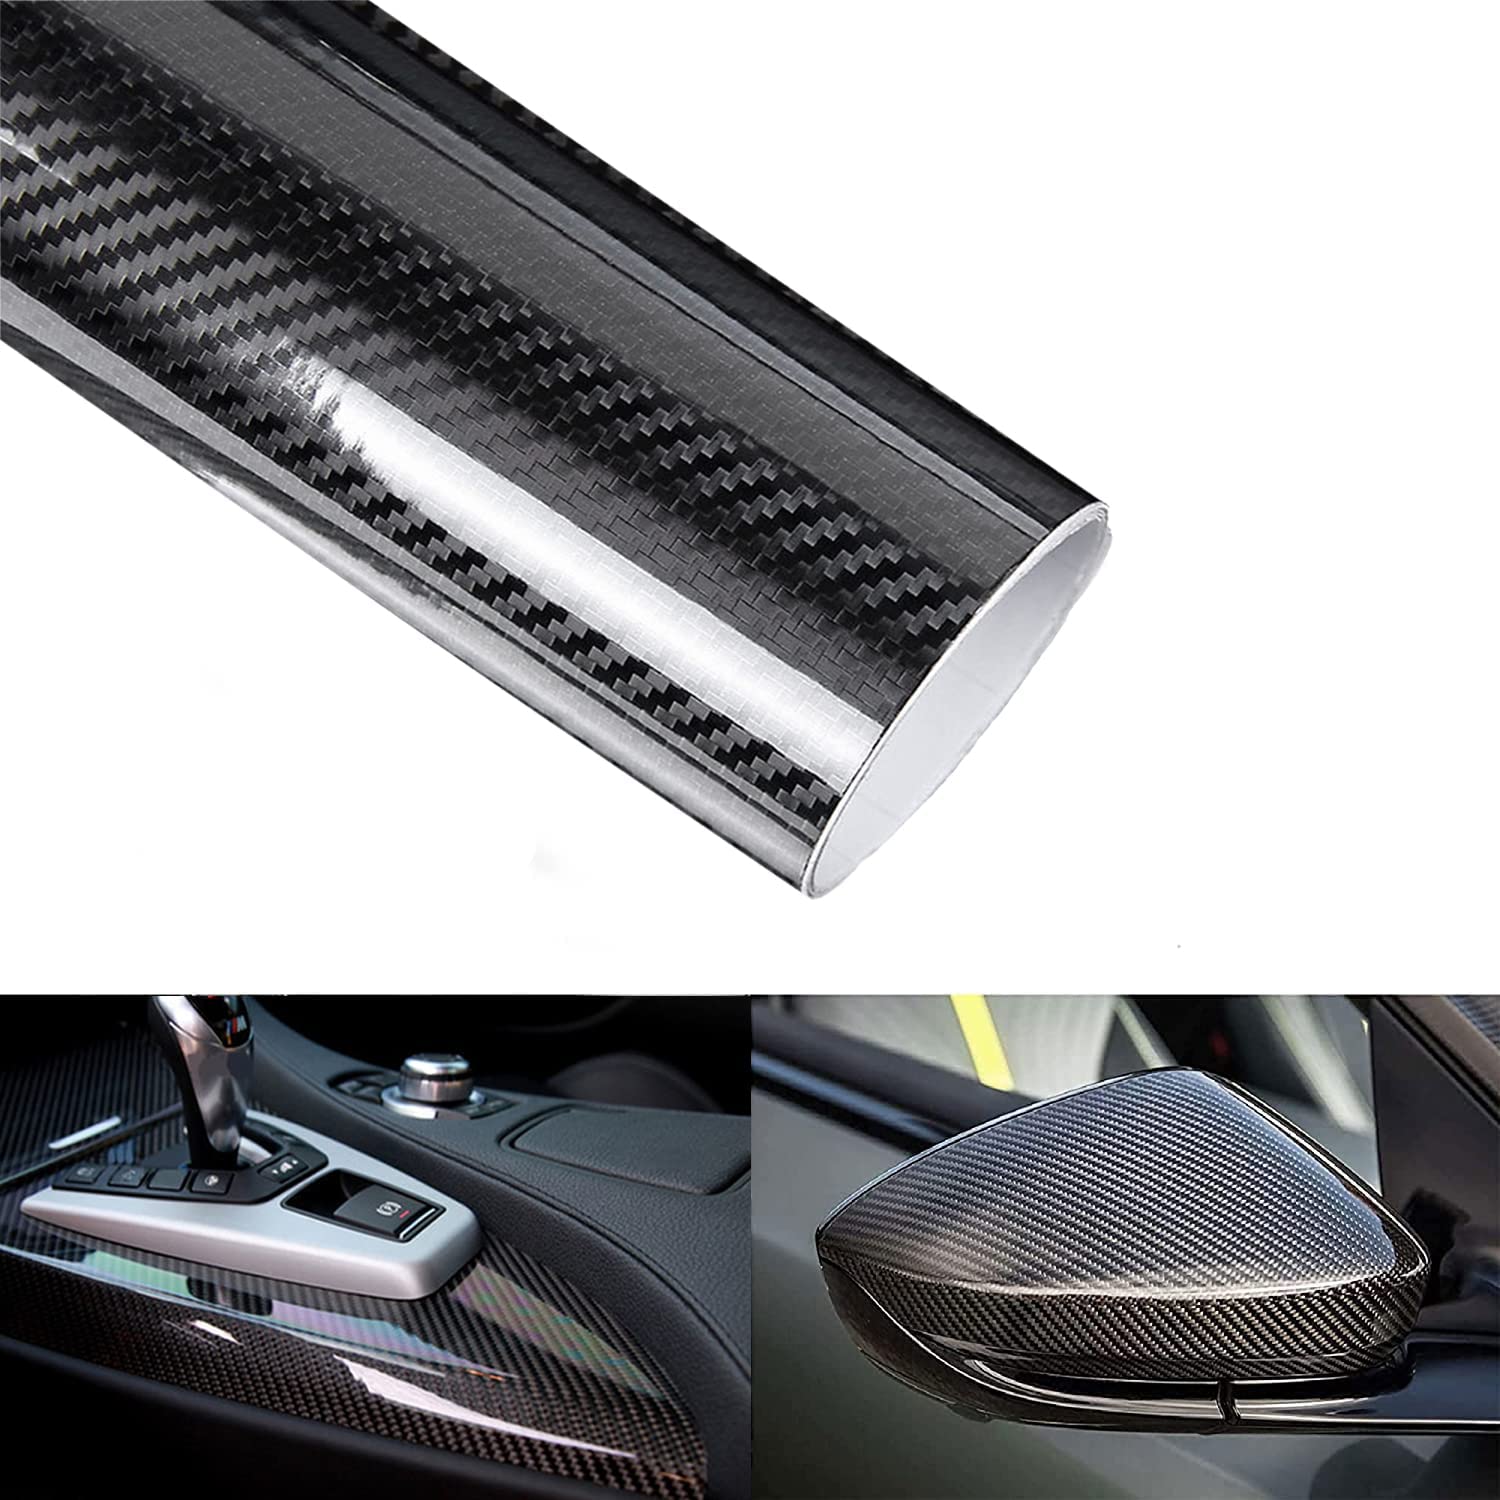 152x10/20/30cm 5D Carbon Fiber High Glossy Film Car Motorcycle Accessories  Interior Decoration For All